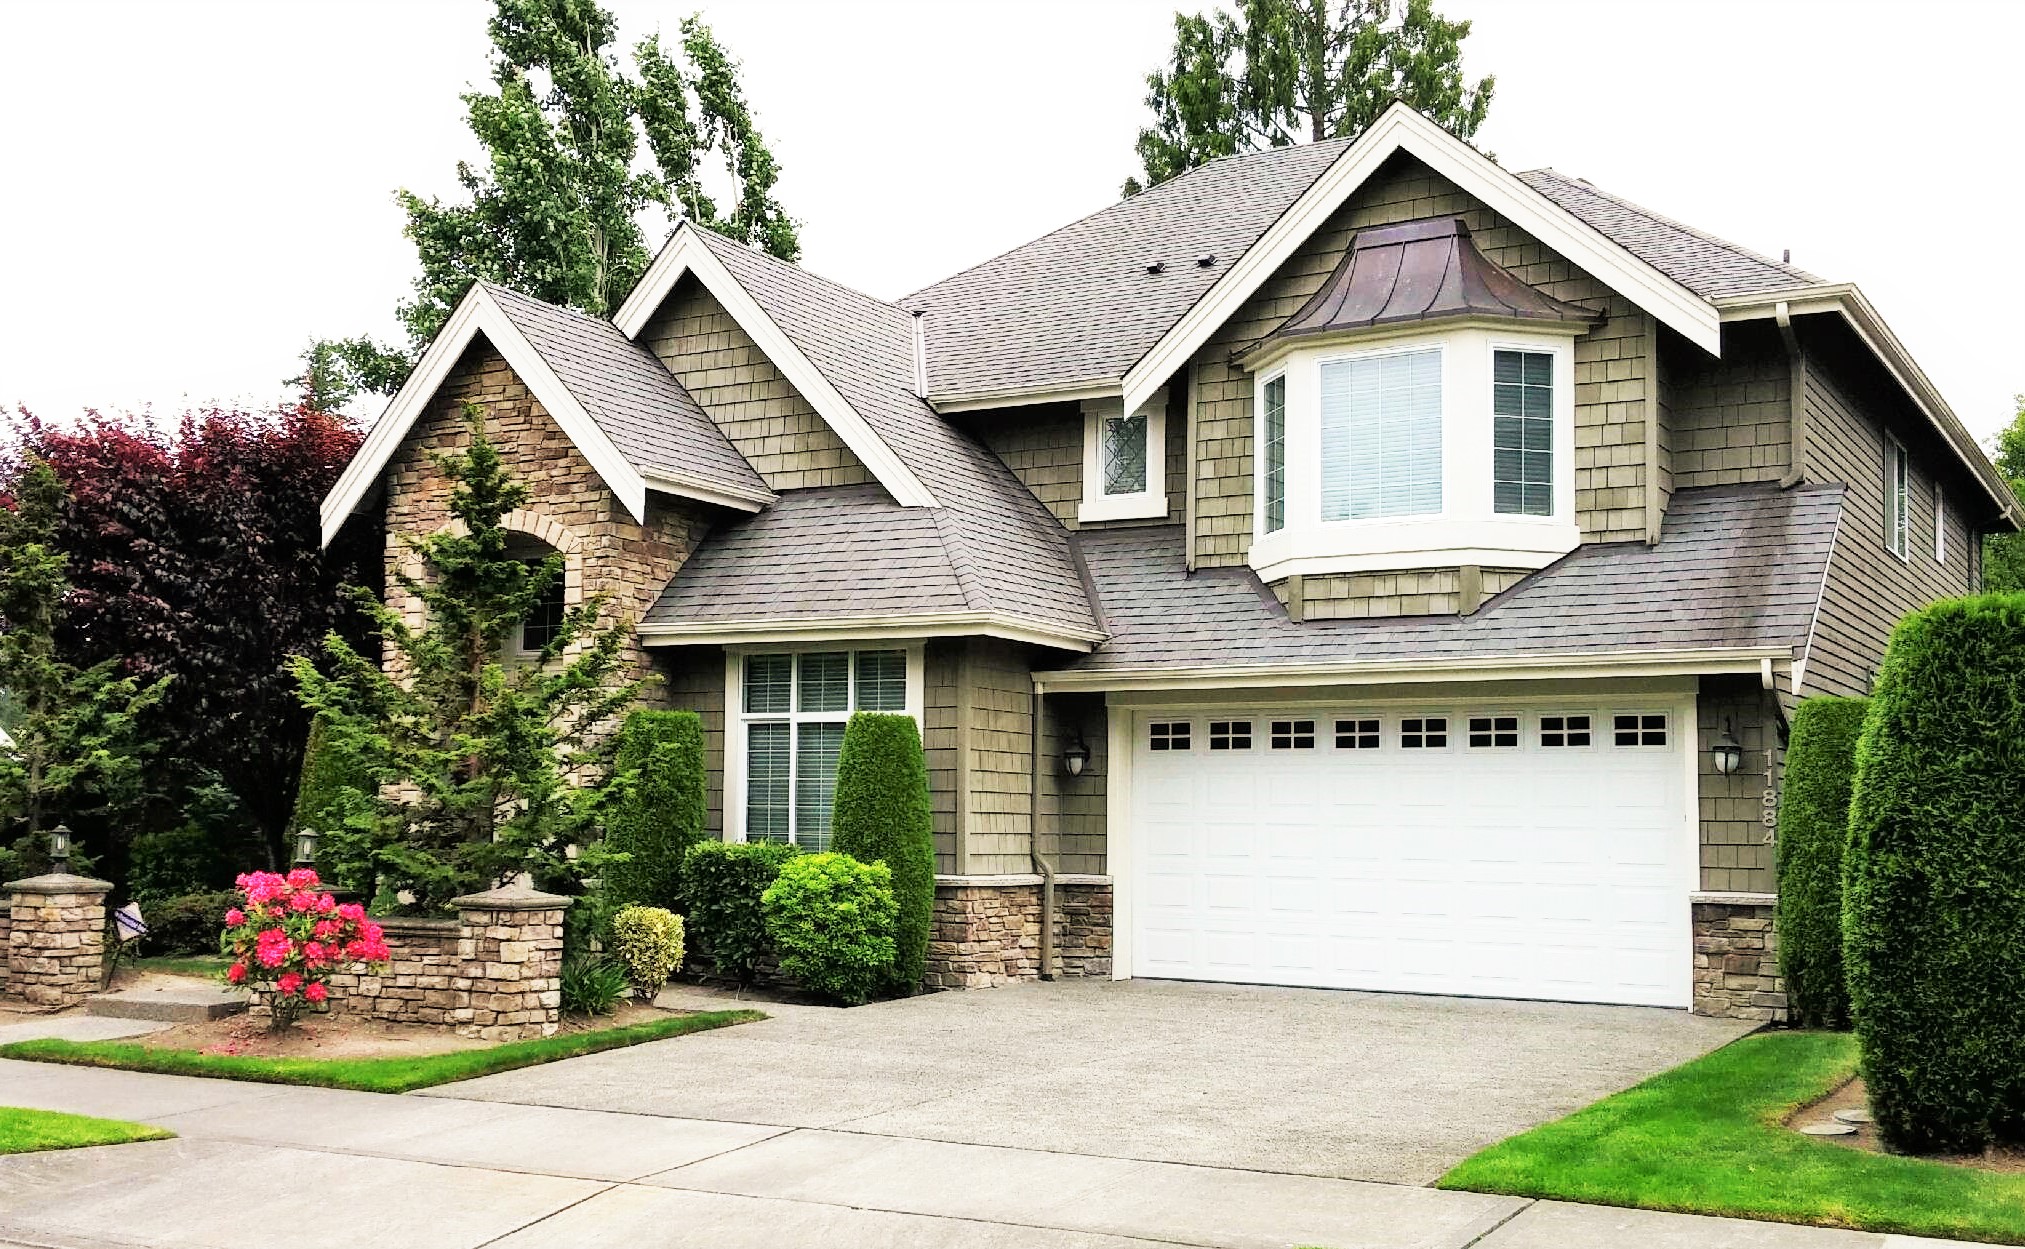 Find the Best Coverage for Your Homeowner Policy in Portland, OR